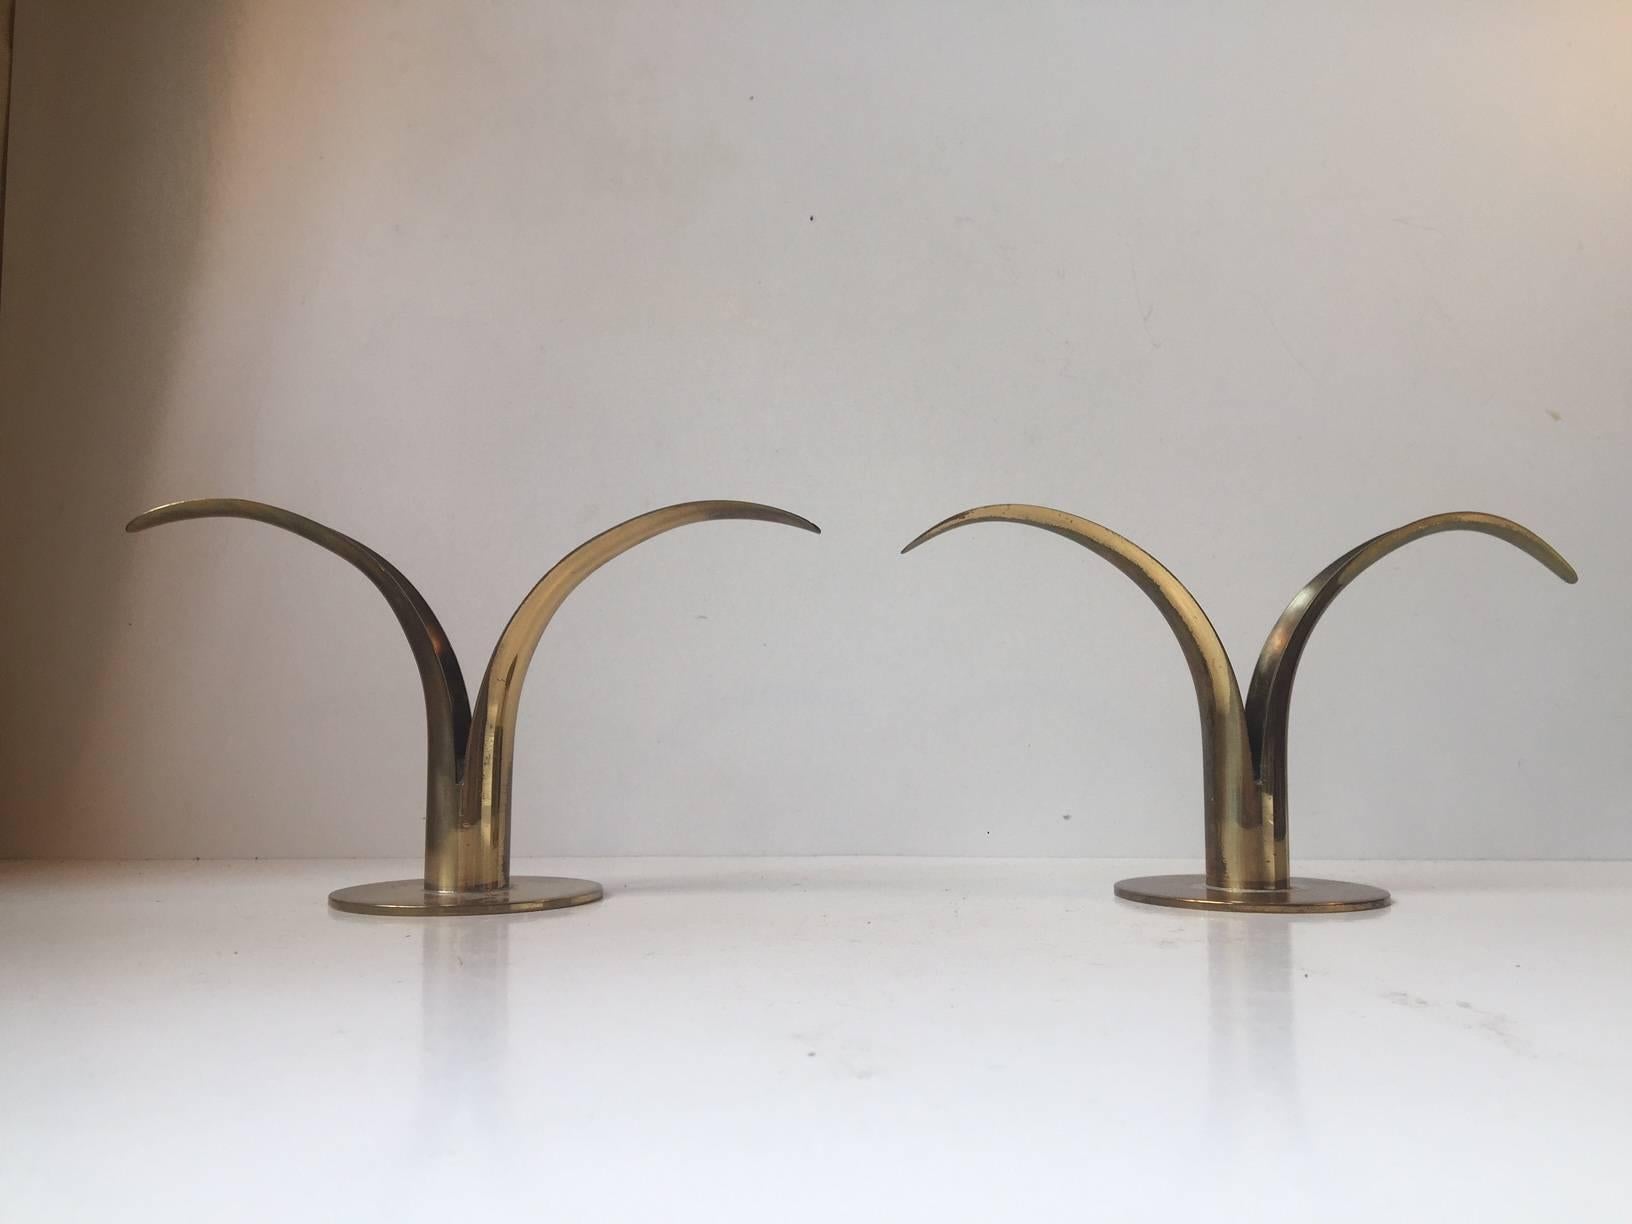 A Pair of brass candle holders designed by Ivar A°lenius Bjo¨rk. The model is called the 